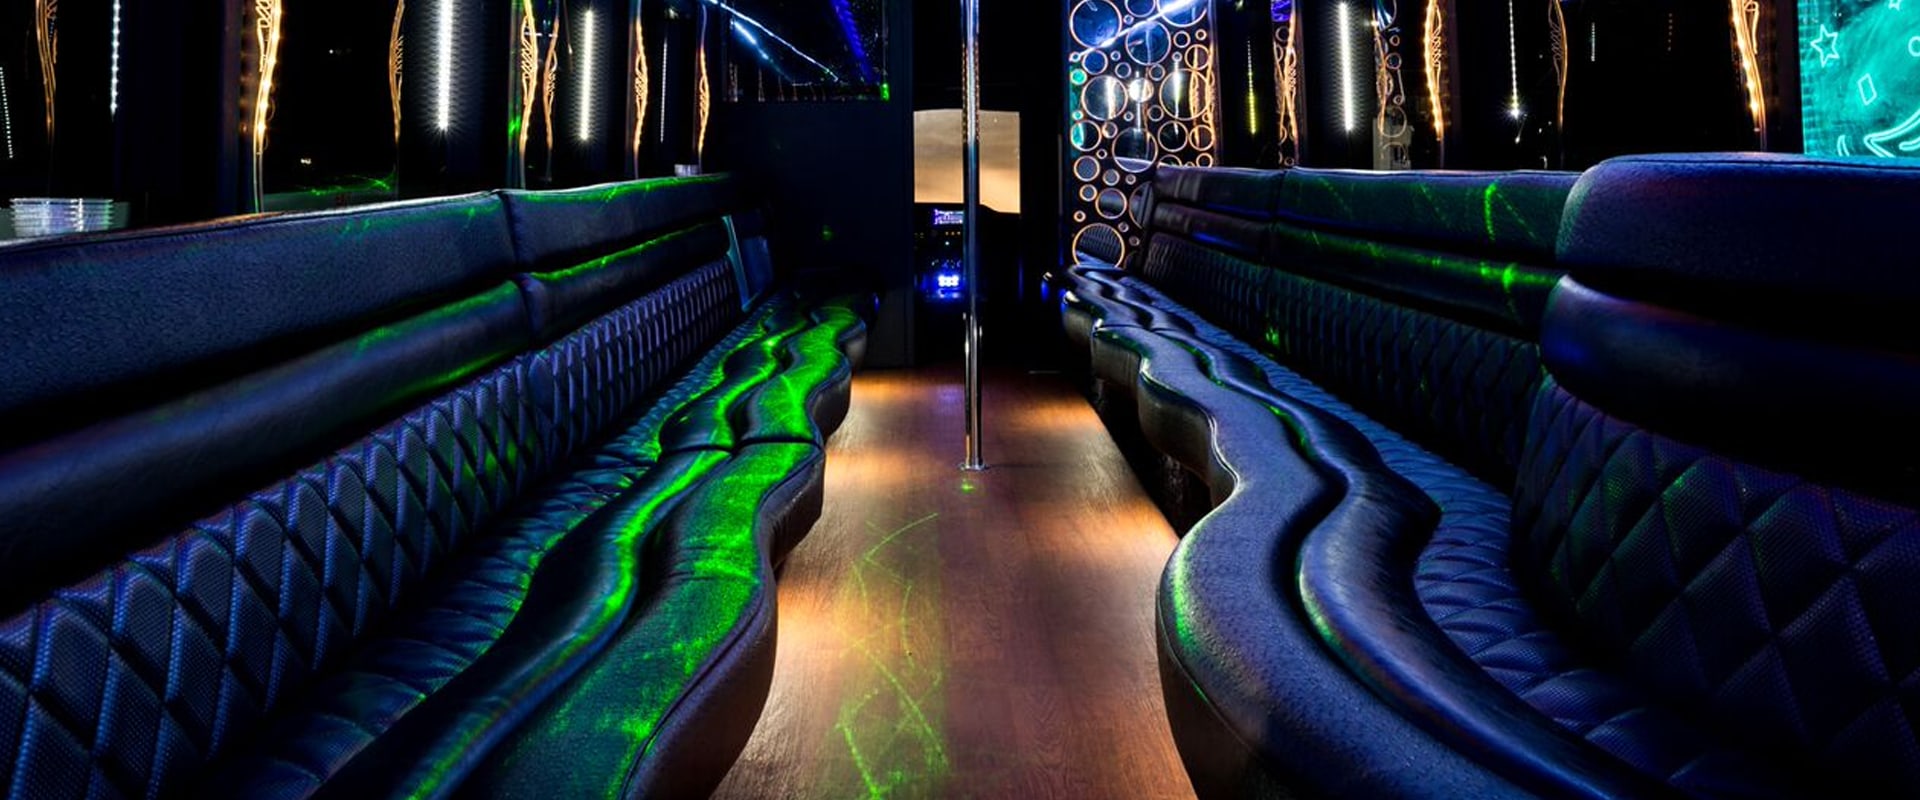 Can you drink on a party bus in california?